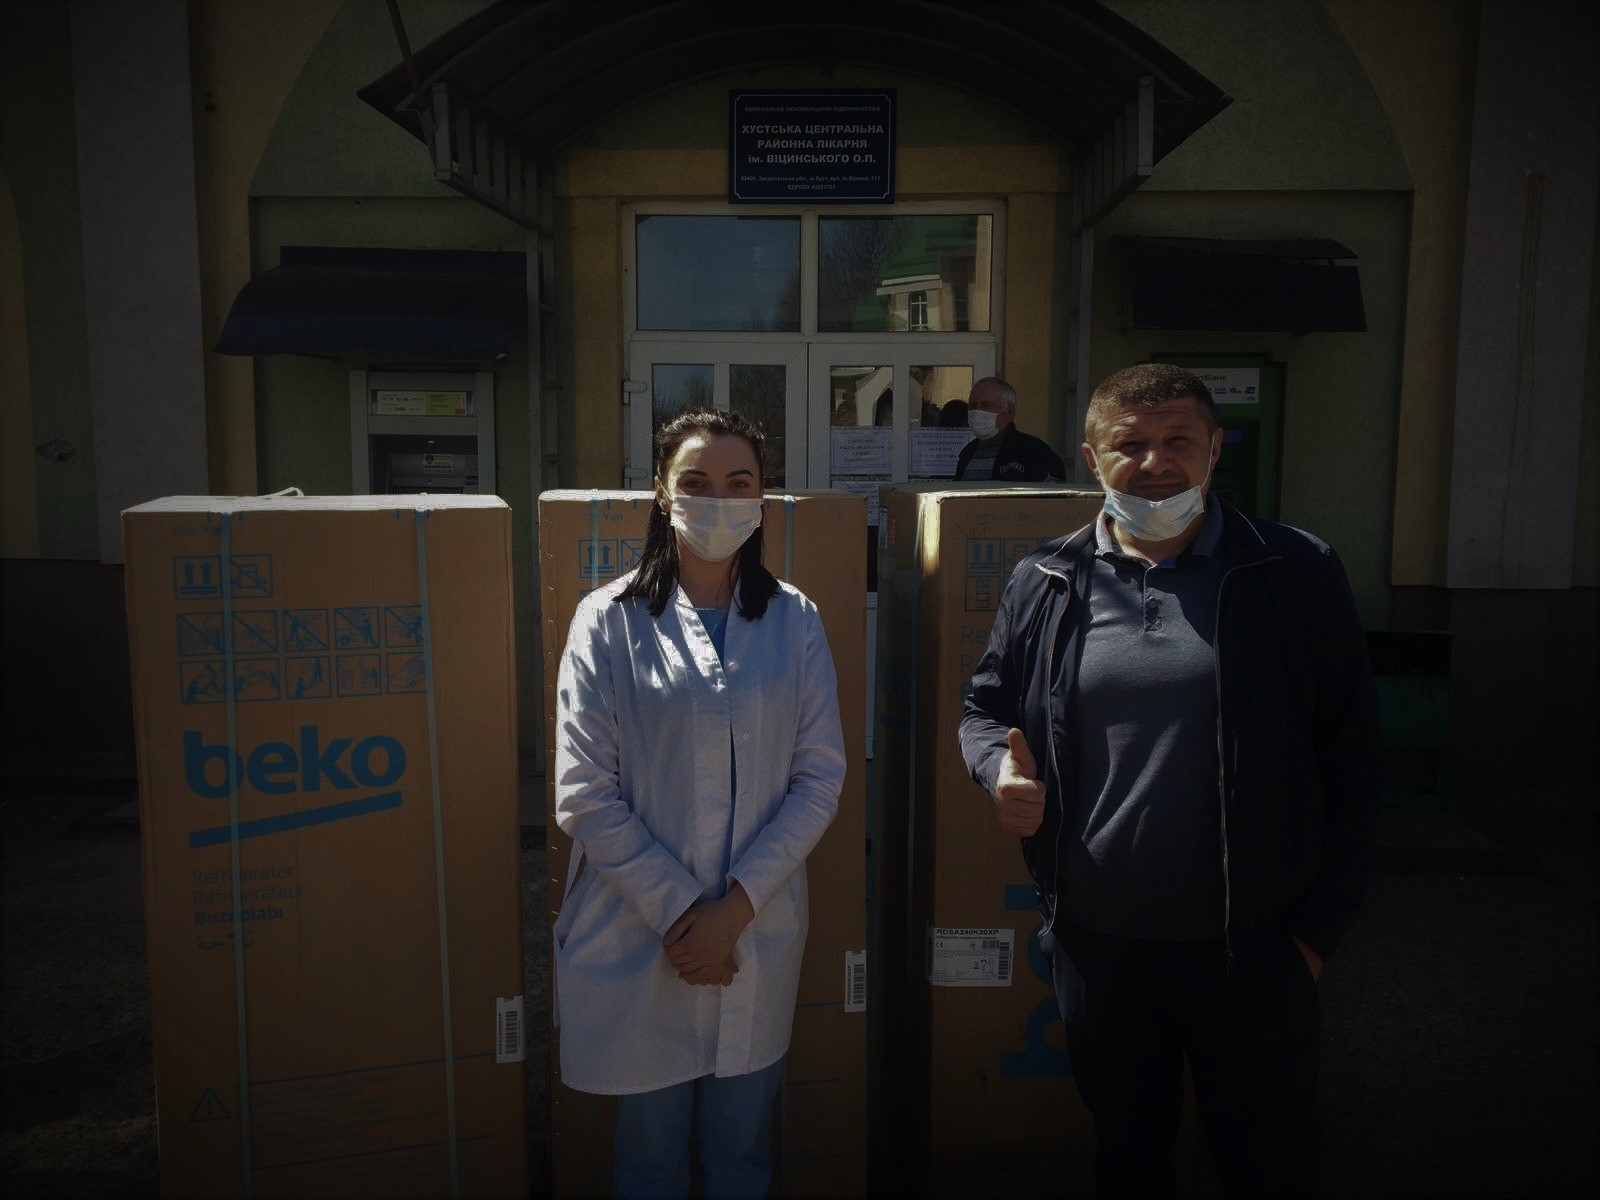 Beko demonstrates commitment to healthcare workers on the frontline with a pledge to support the ‘Best Team in the World’